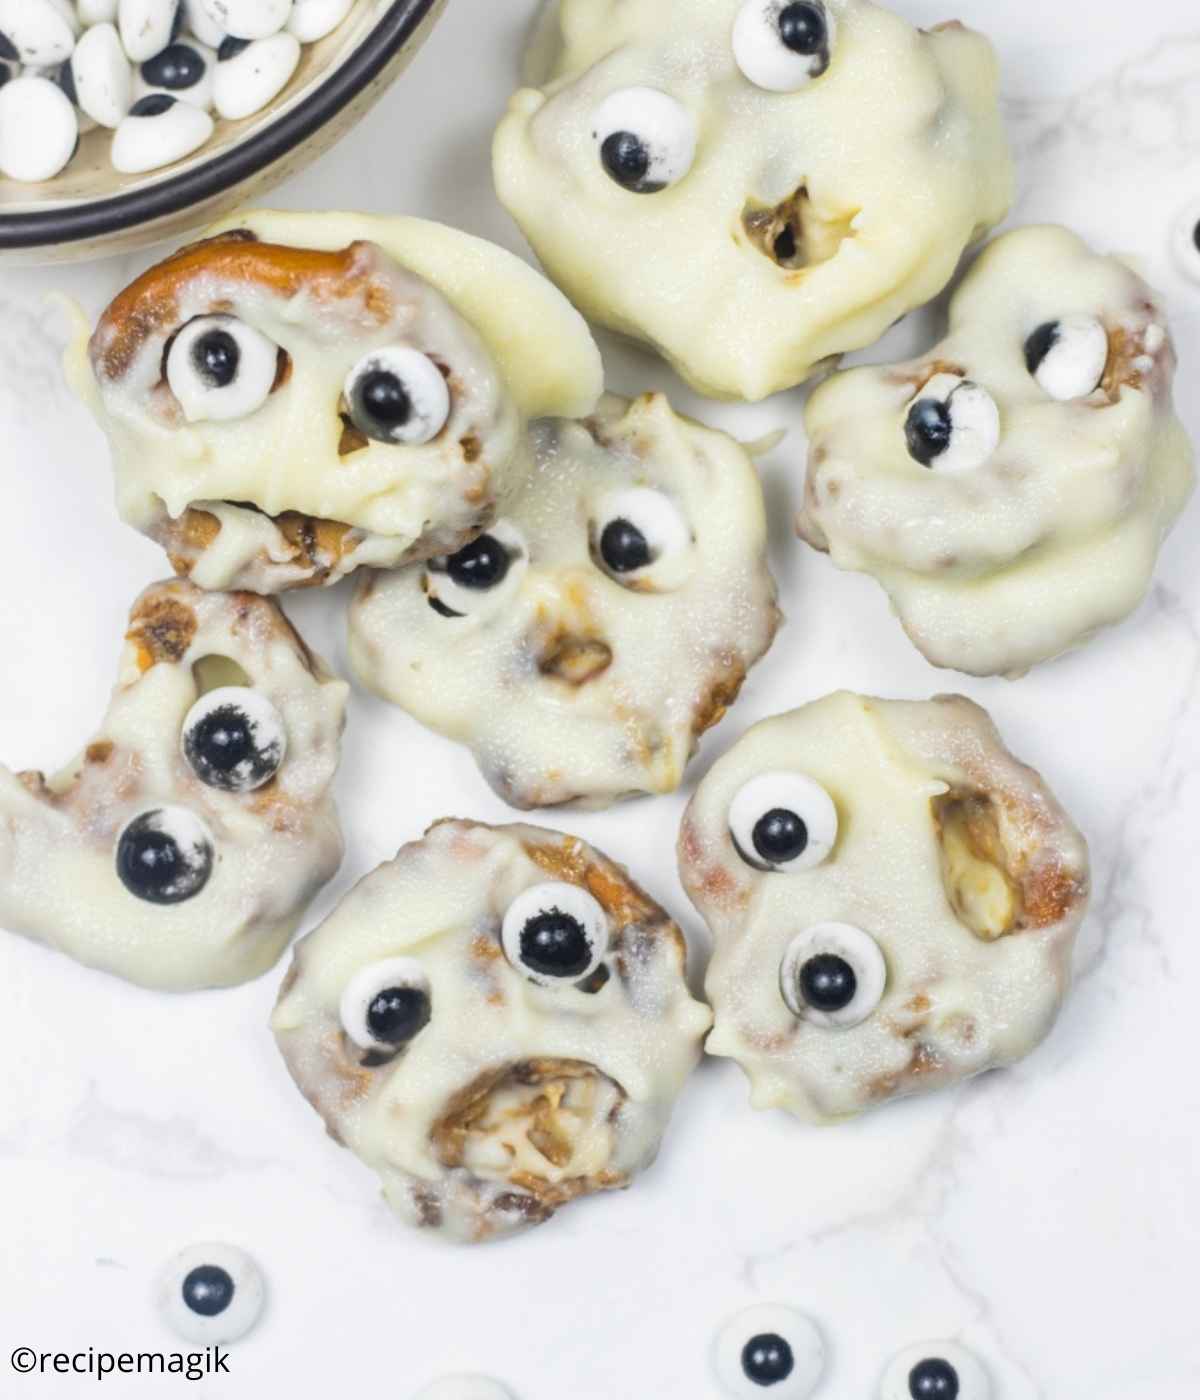 halloween pretzels coated in white chocolate and decorated with candy eyeballs